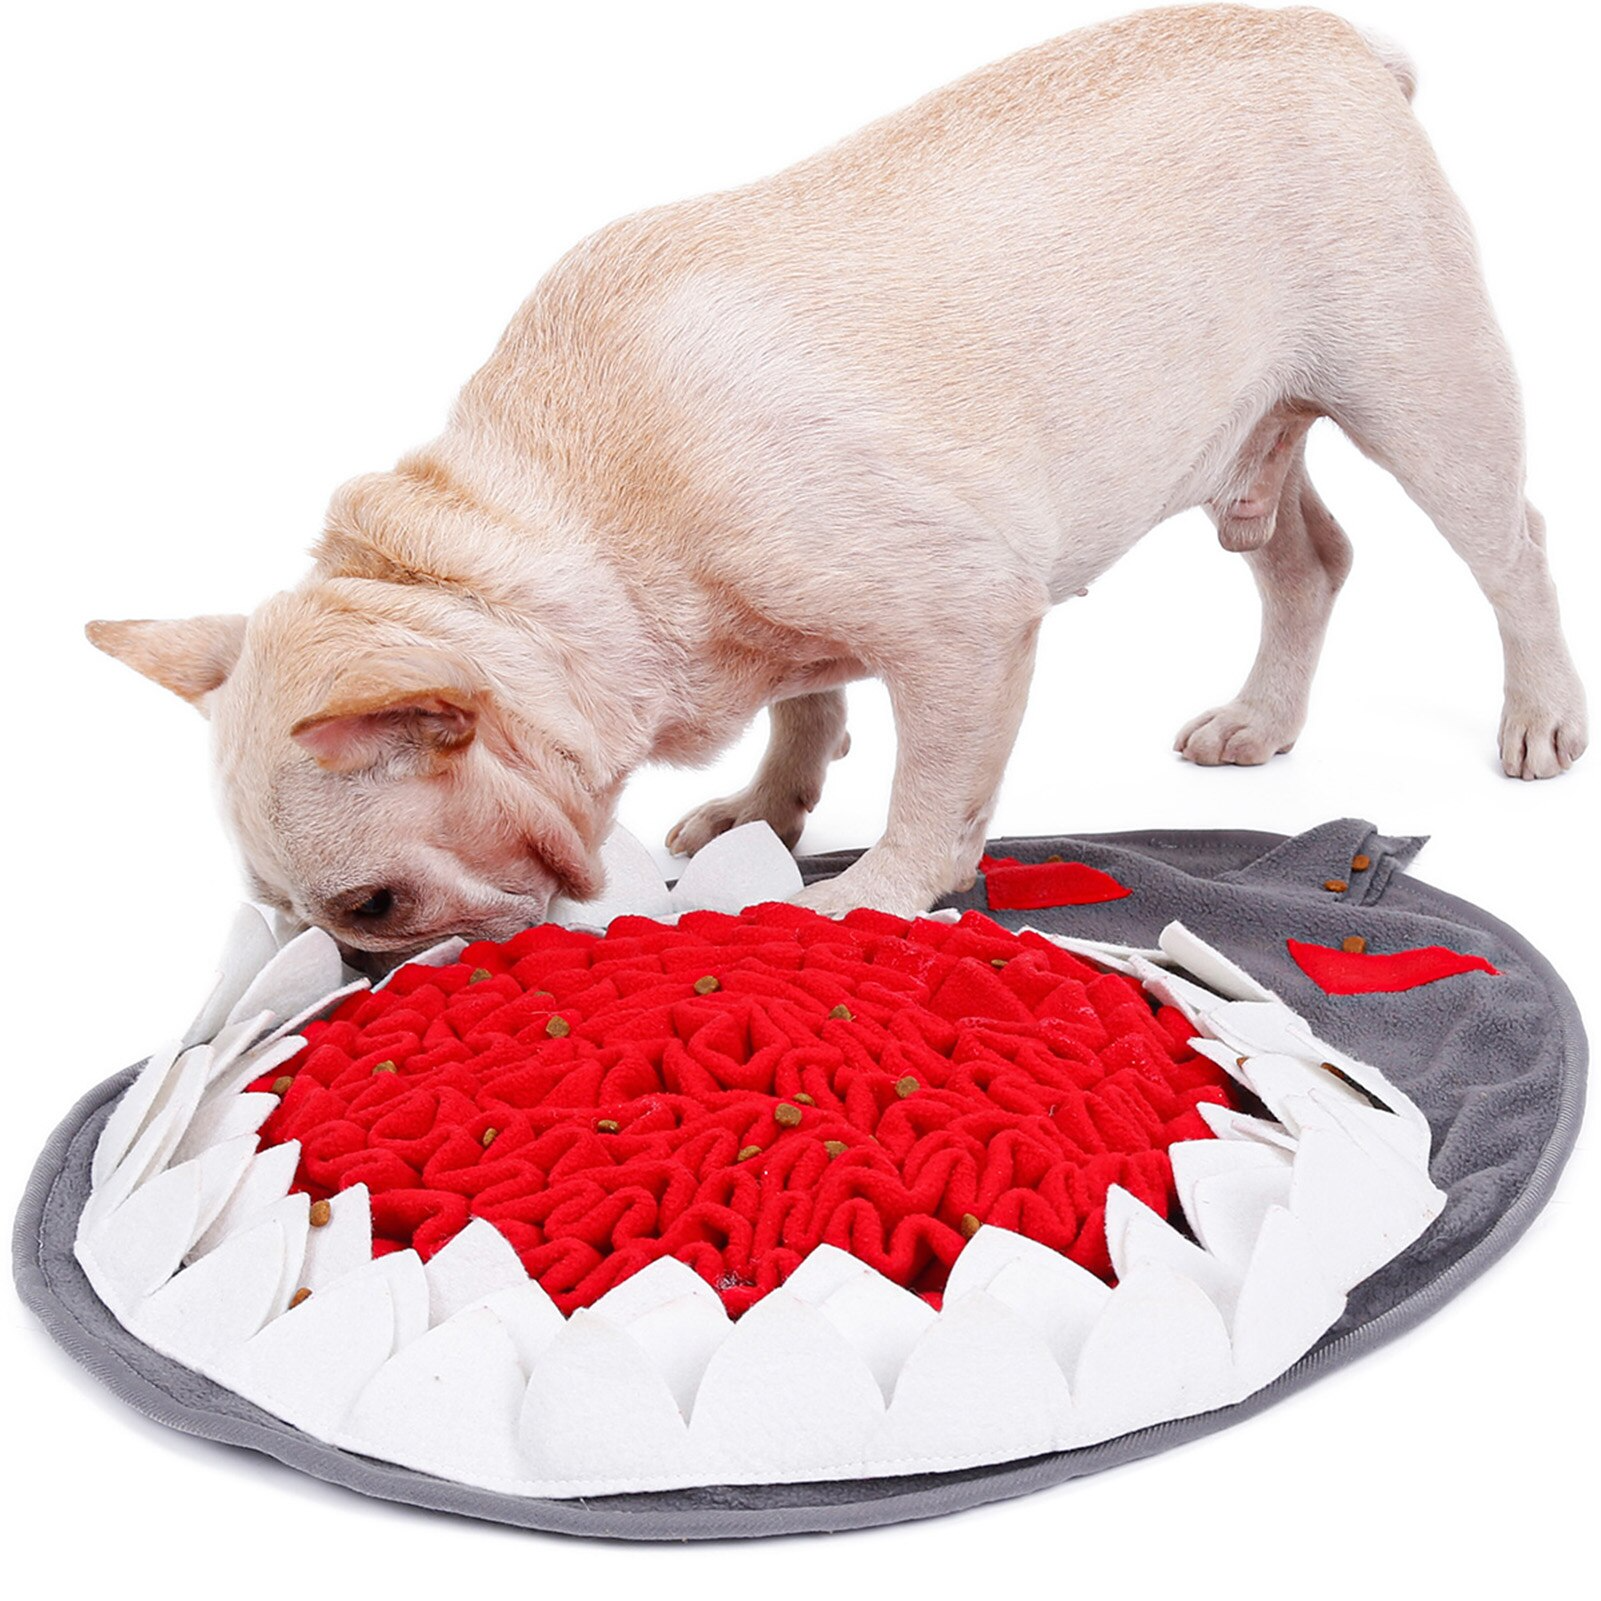 Best snuffle mats for dogs: to encourage natural foraging instincts